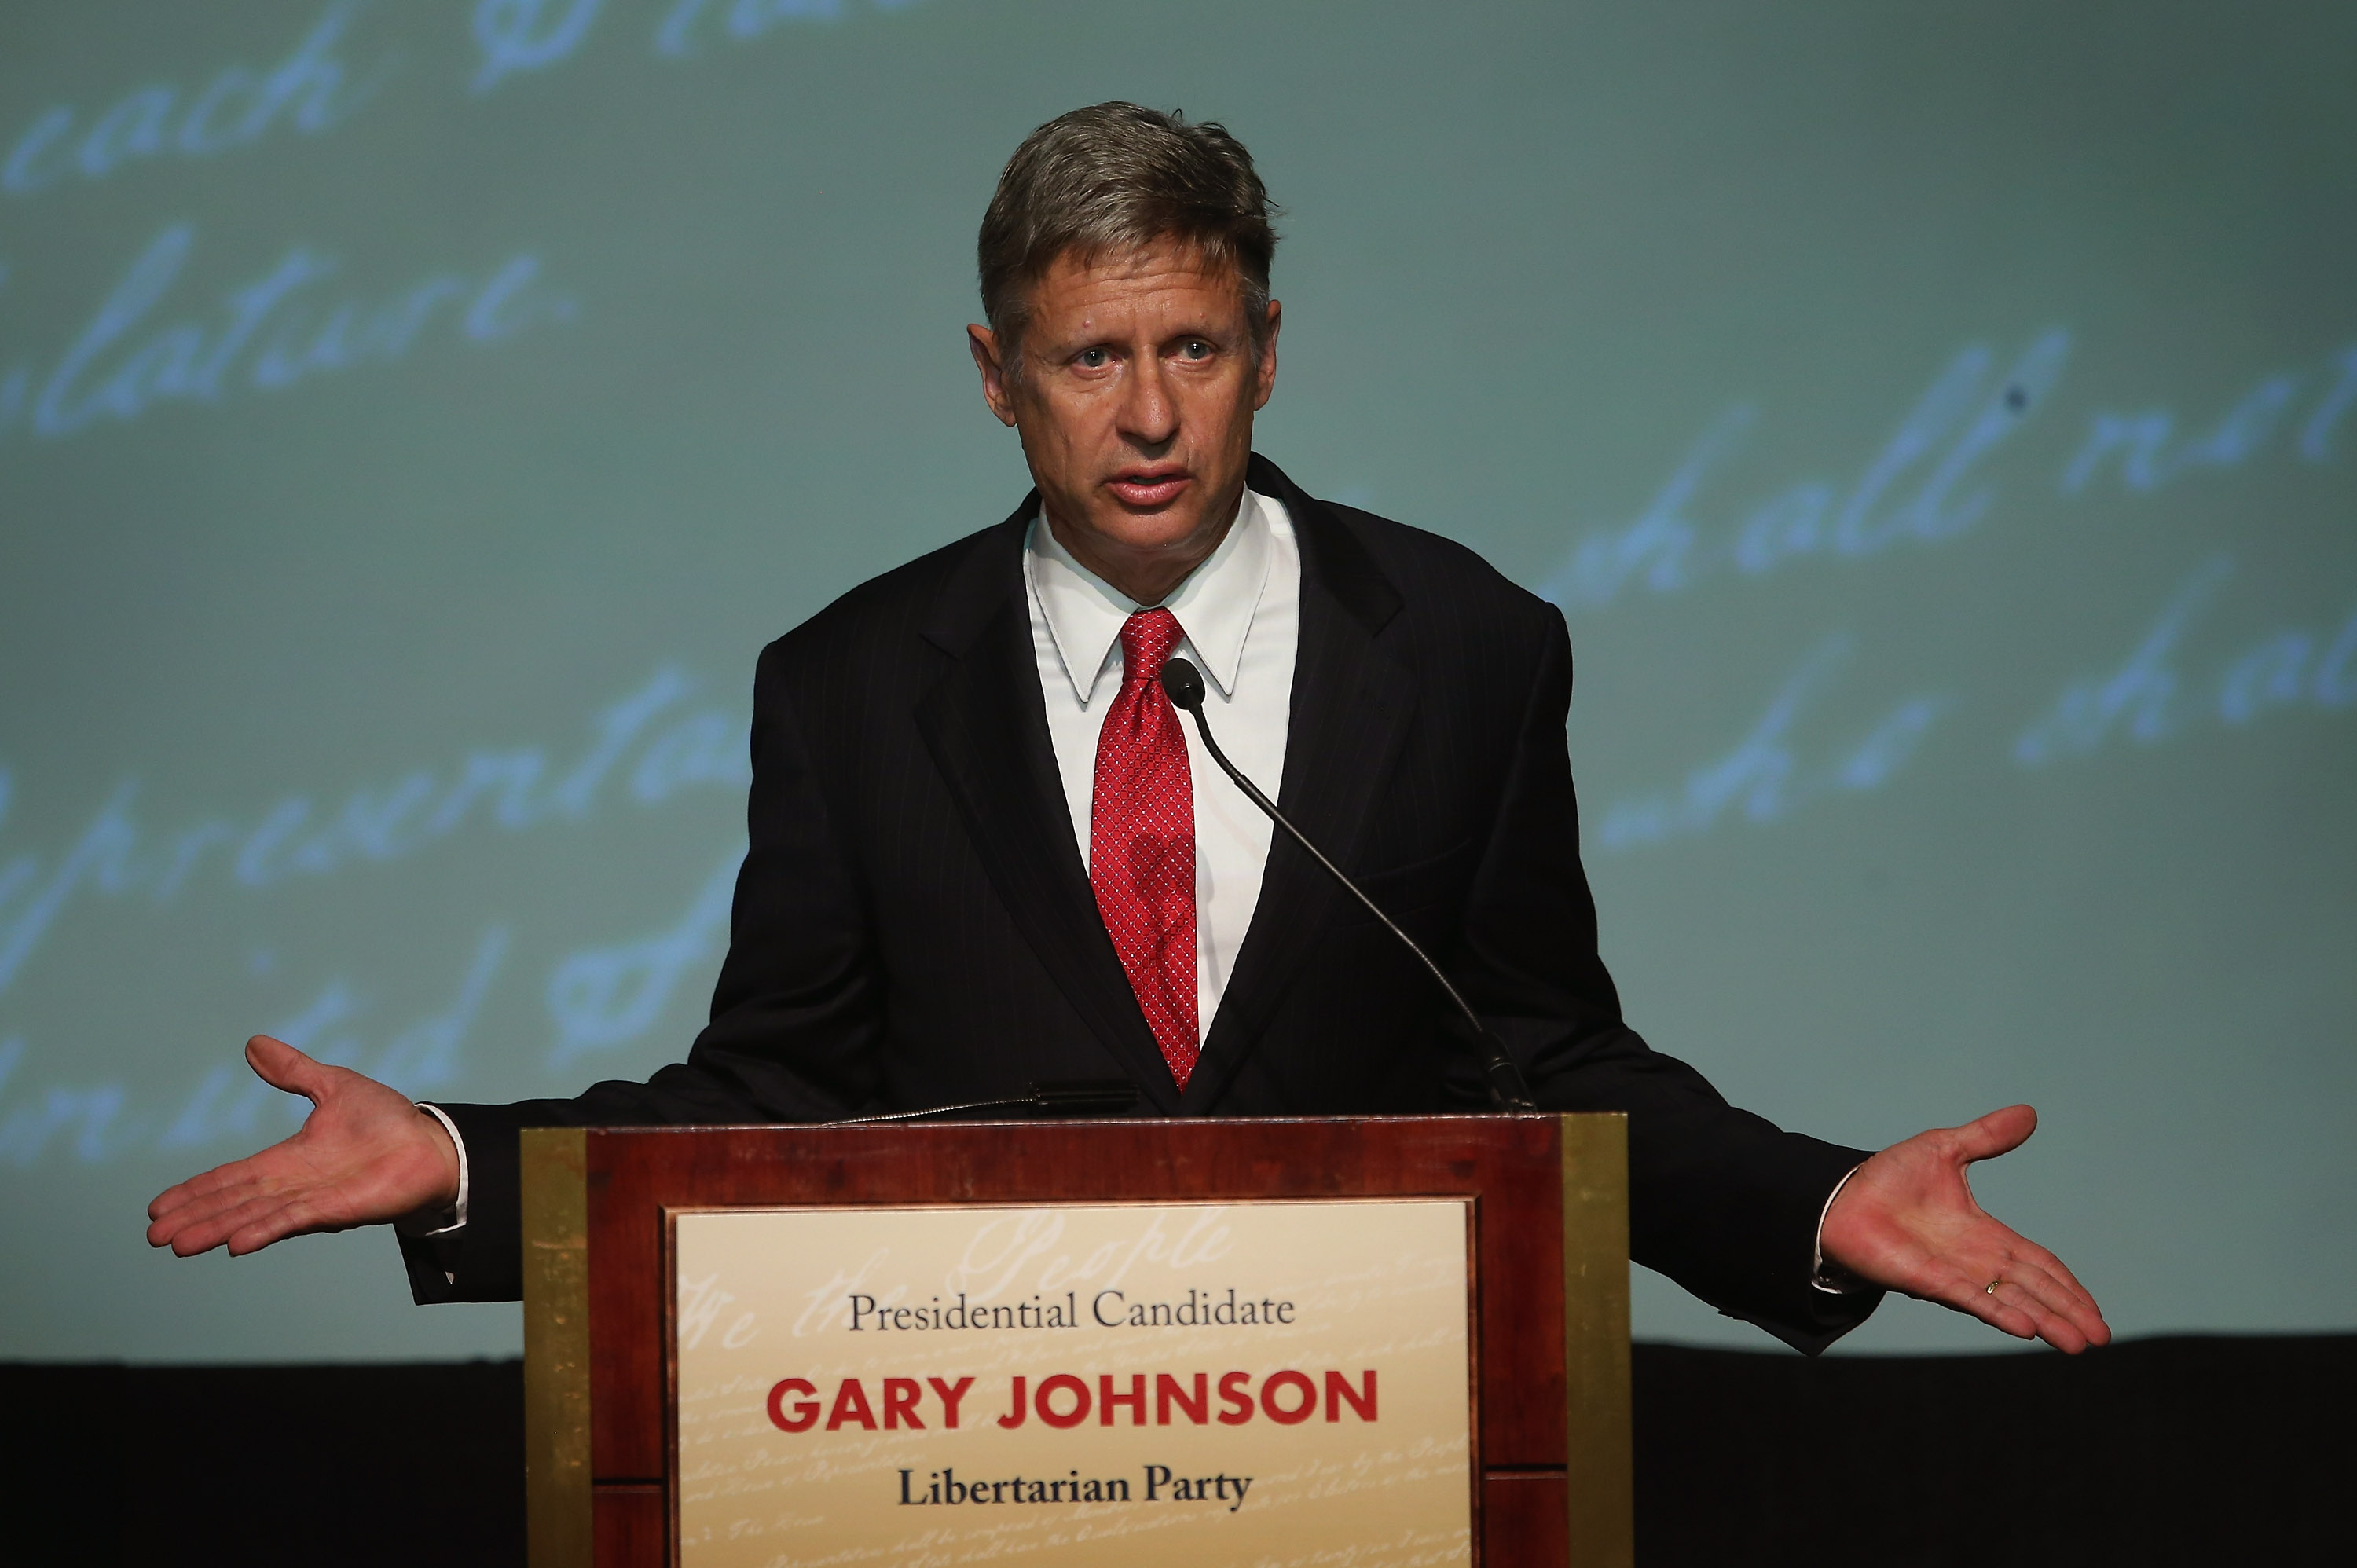 Gary Johnson may have missed his opportunity.